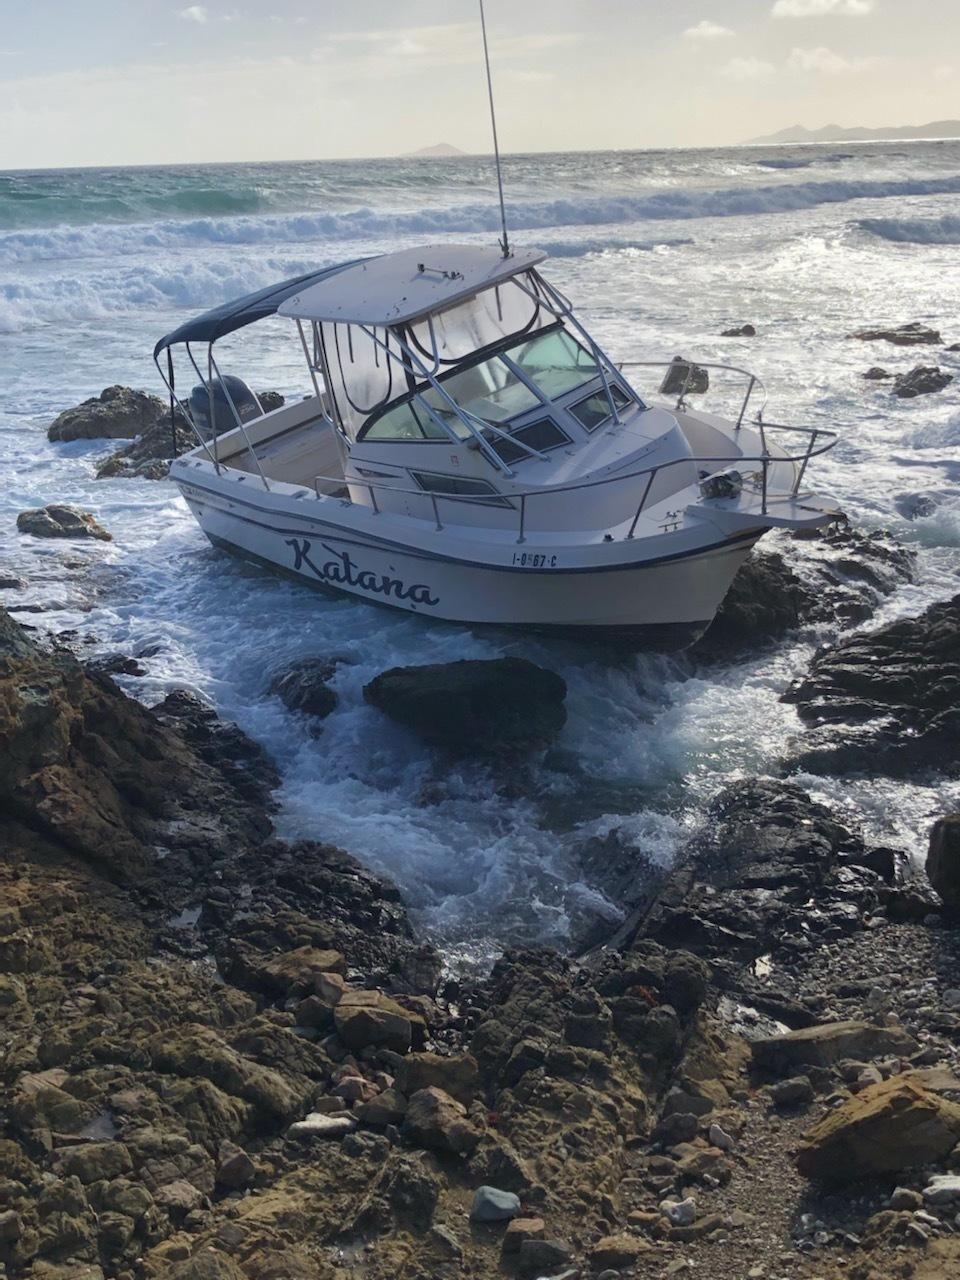 The pleasure craft Katana washed ashore on the rocks the morning of March 7, 2022, near Judith’s Fancy in St. Croix, U.S. Virgin Islands, after a Coast Guard boat crew rescued four men and five women from the vessel the evening of March 6, 2022, when the vessel reportedly ran out of fuel and started drifting towards the rocks. (U.S. Coast Guard photo)